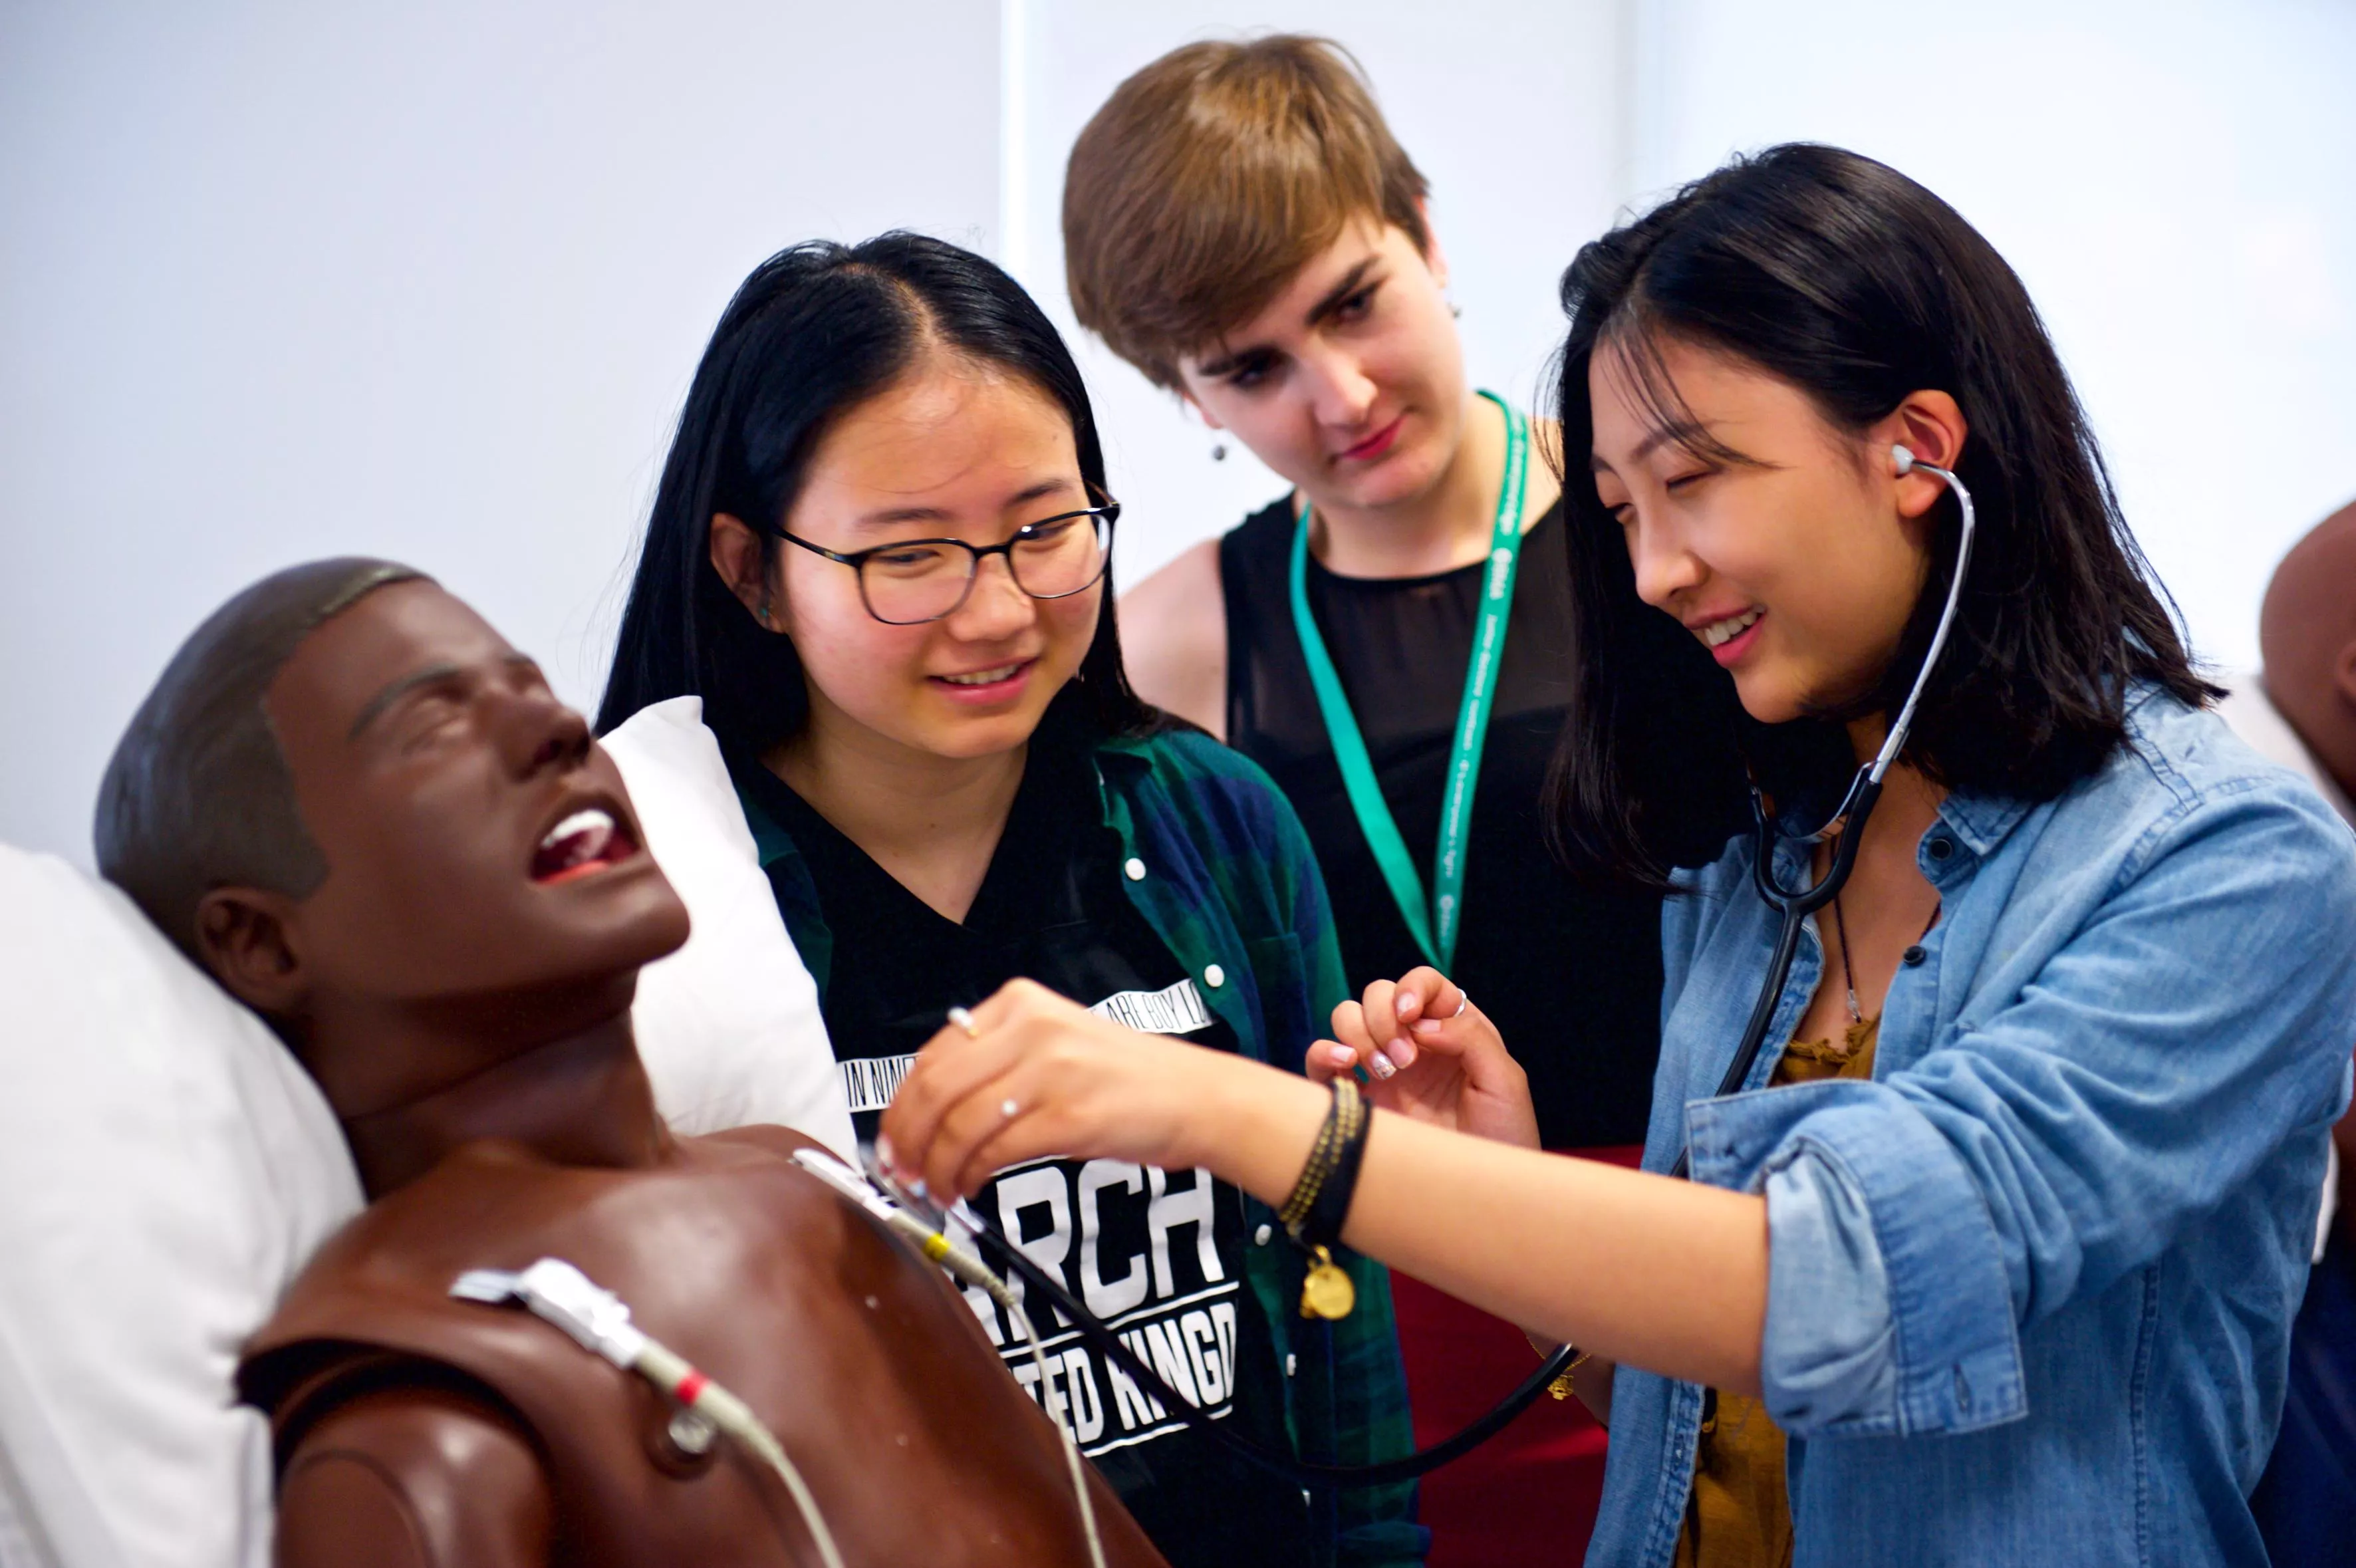 Medical students listening for a heartbeat on a training manikin